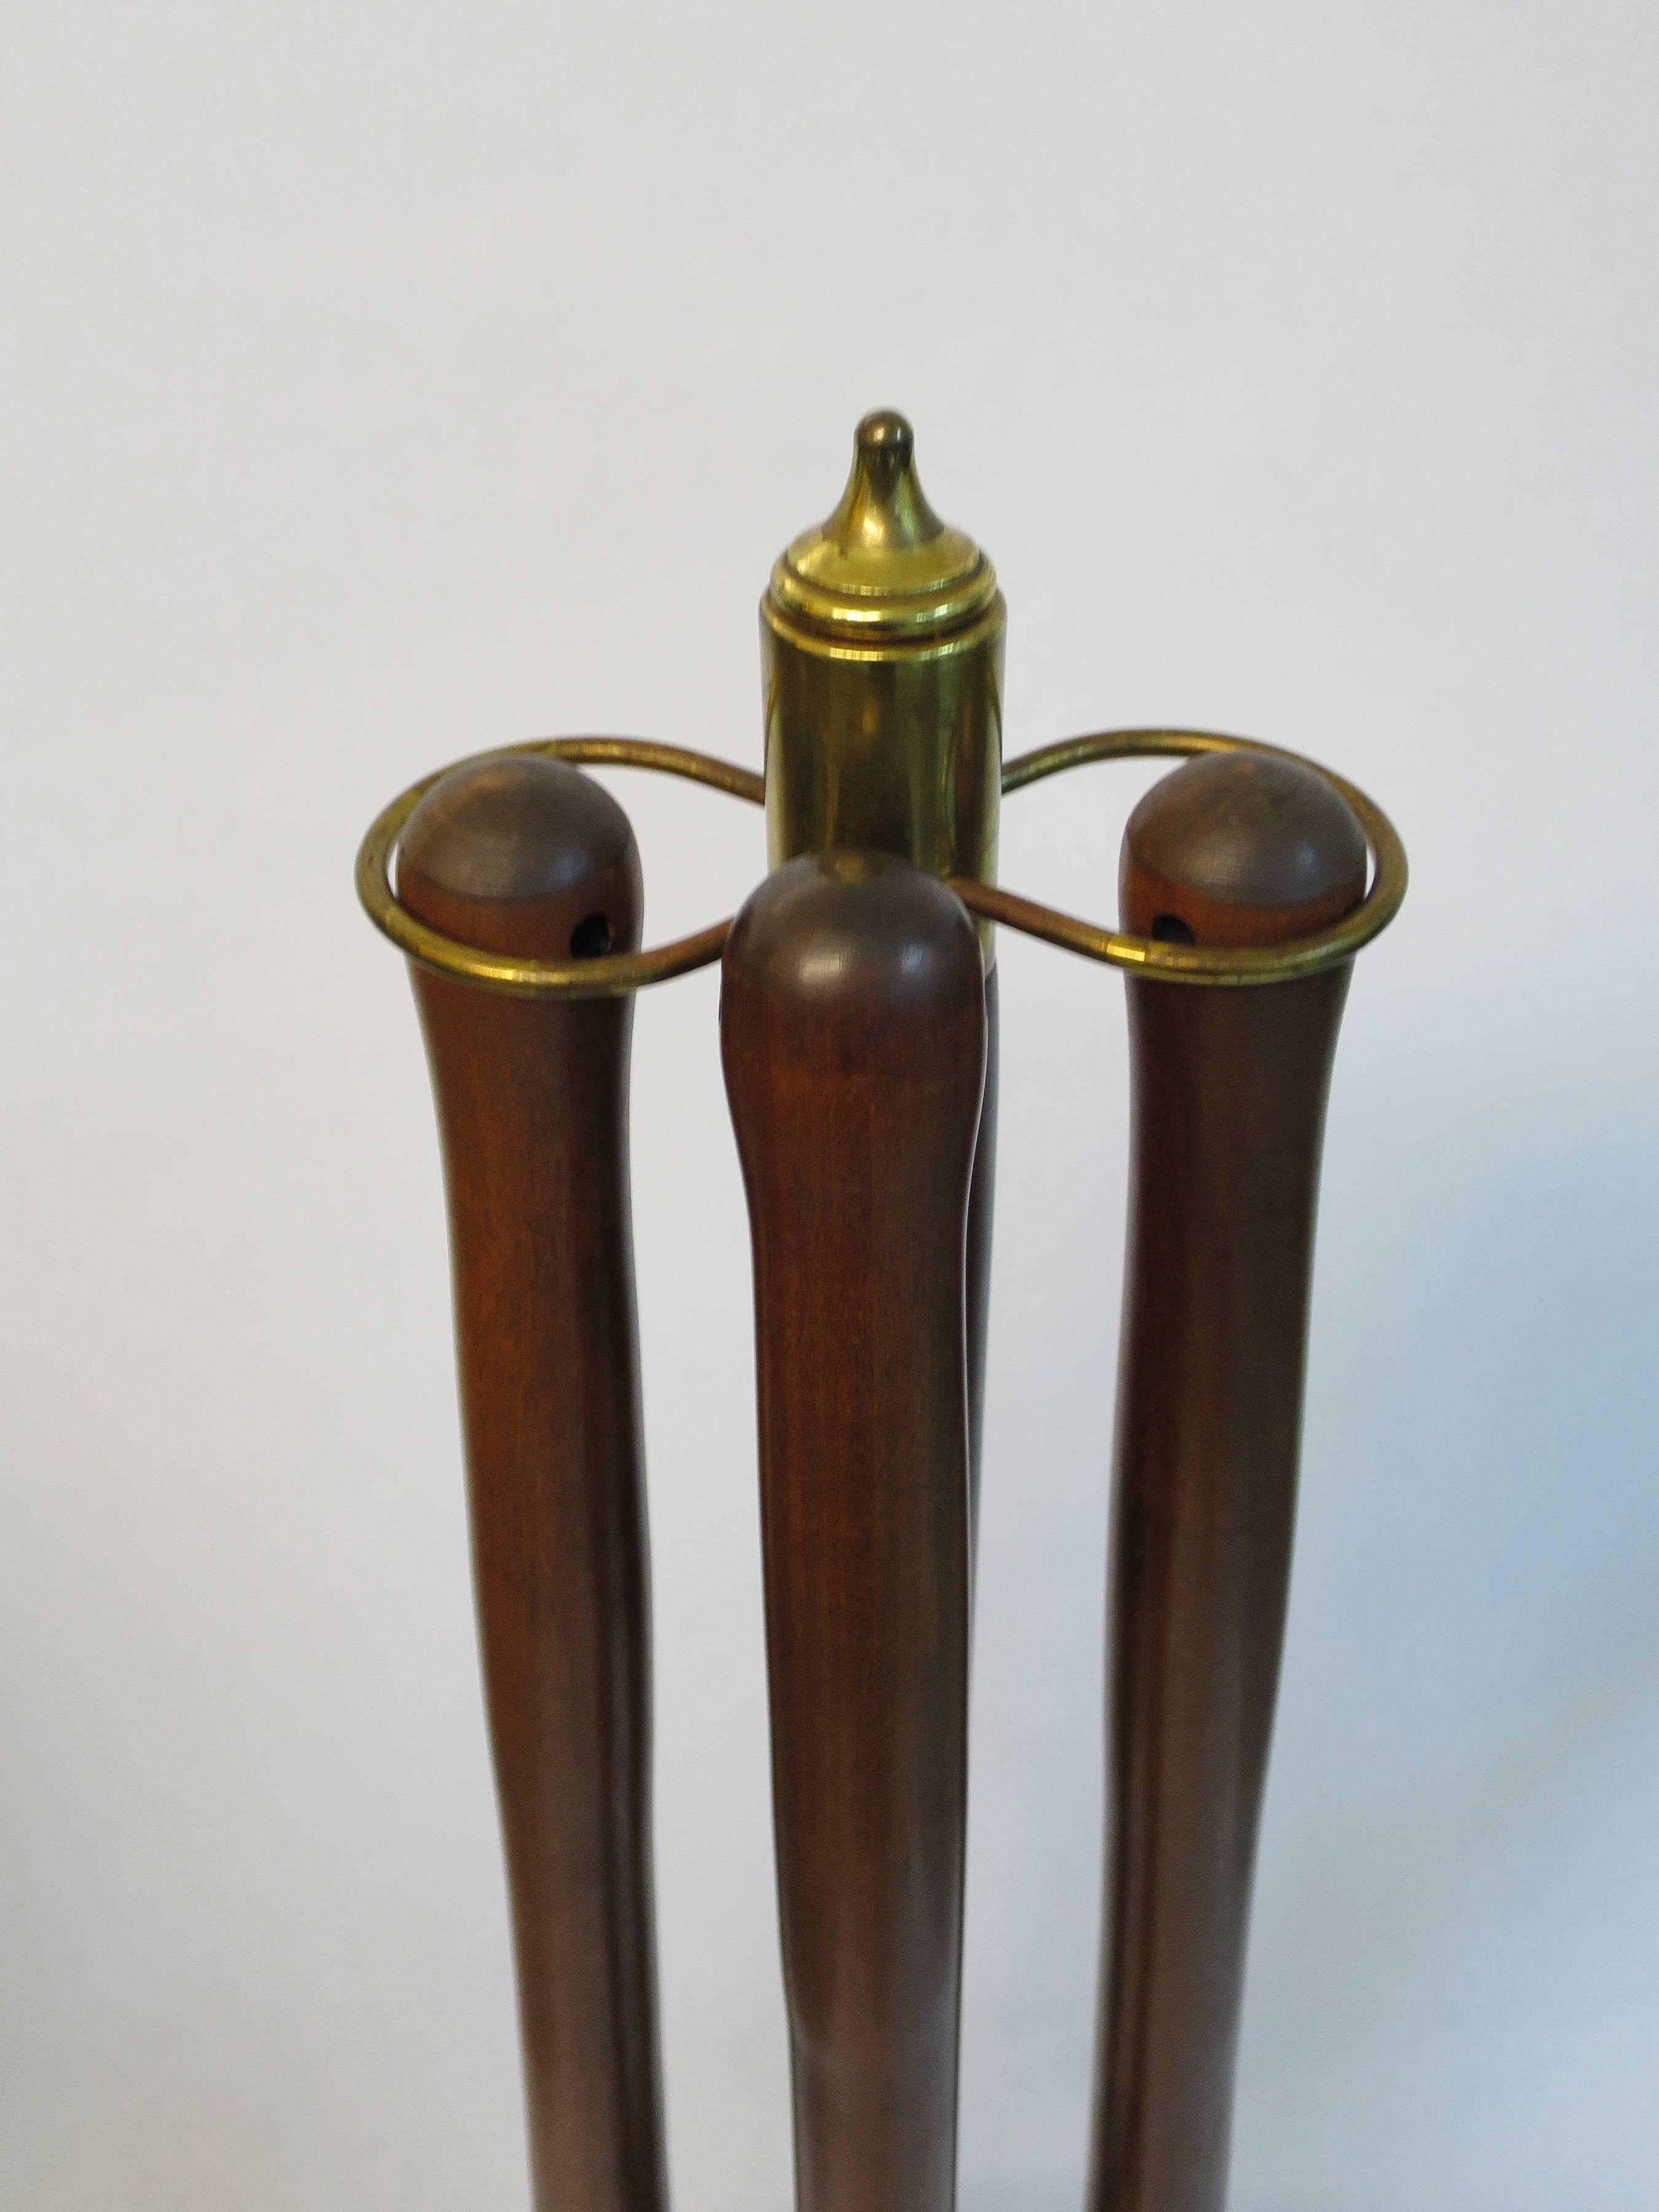 American Modern Fireplace Tools by Seymour & Company